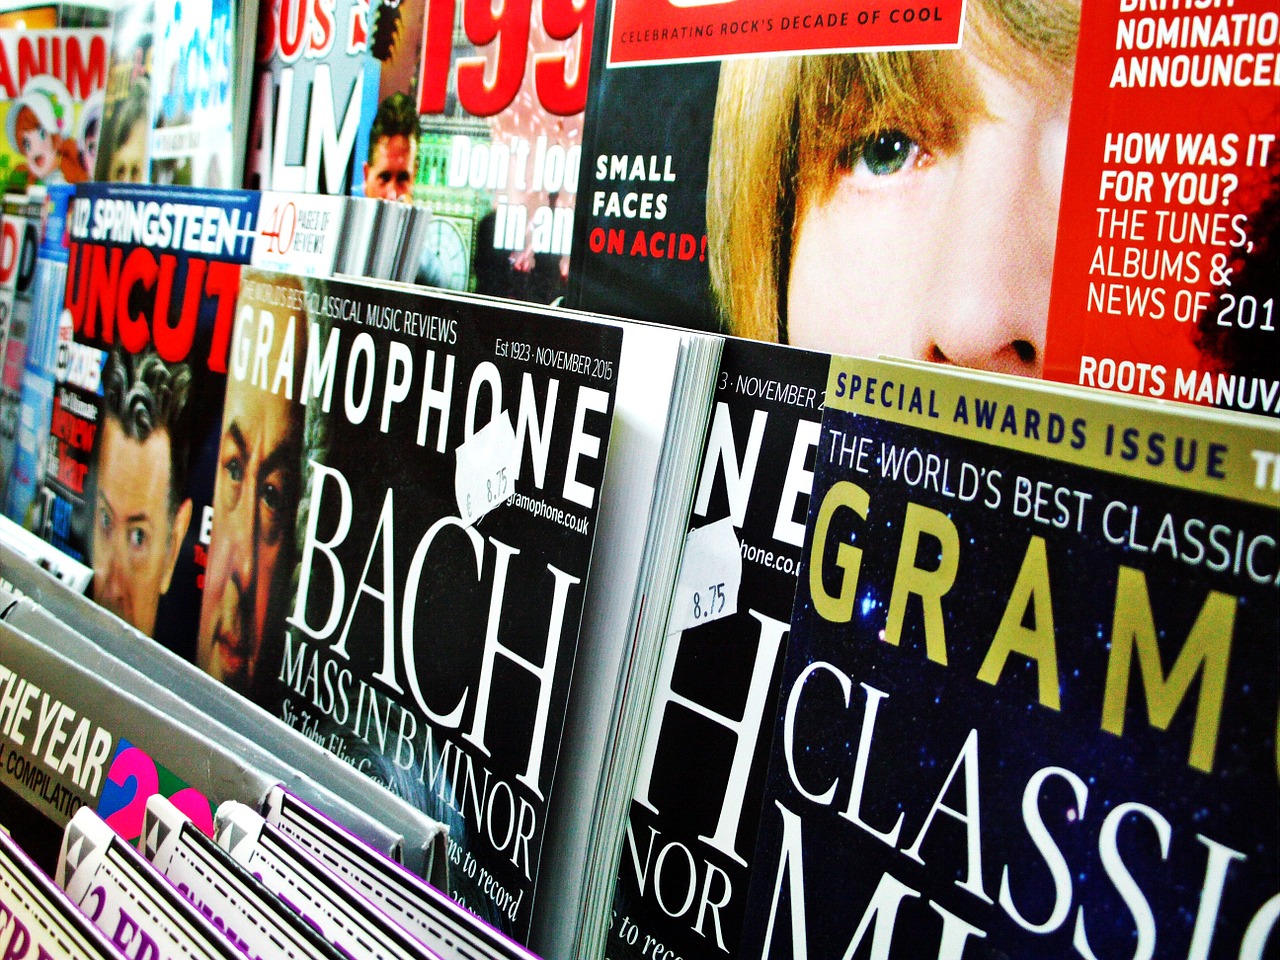 Lesser Known Magazines Provide Less Competition for Writers! By Sue Carloni